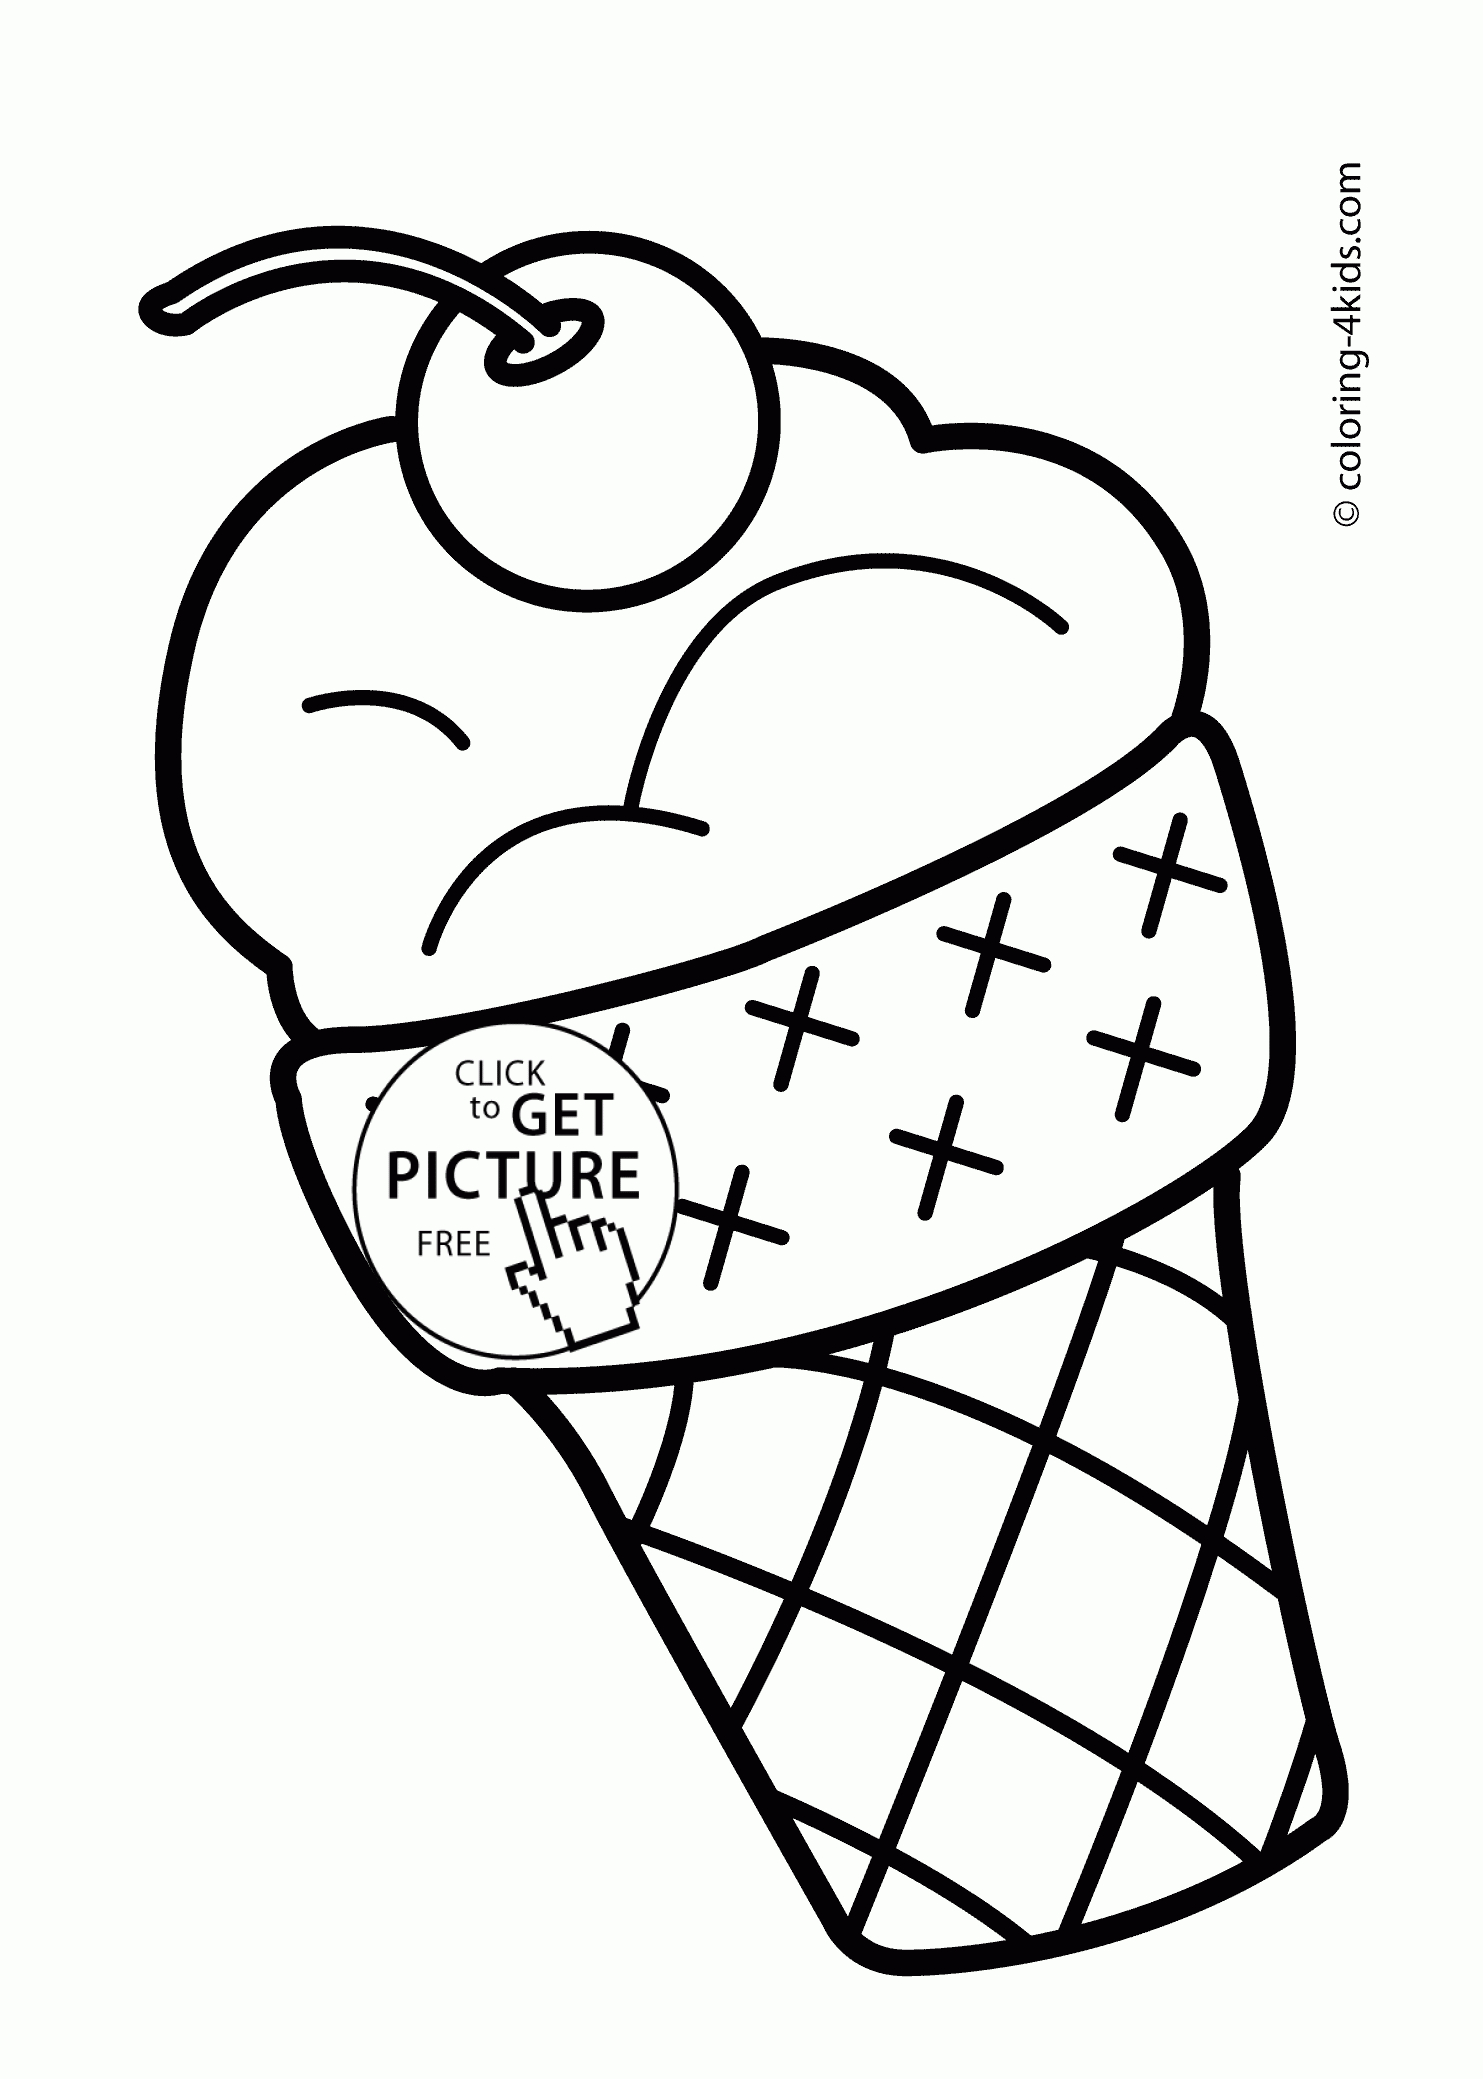 Summer Coloring Pages With Ice Cream For Kids, Seasons Coloring - Ice Cream Color Pages Printable Free